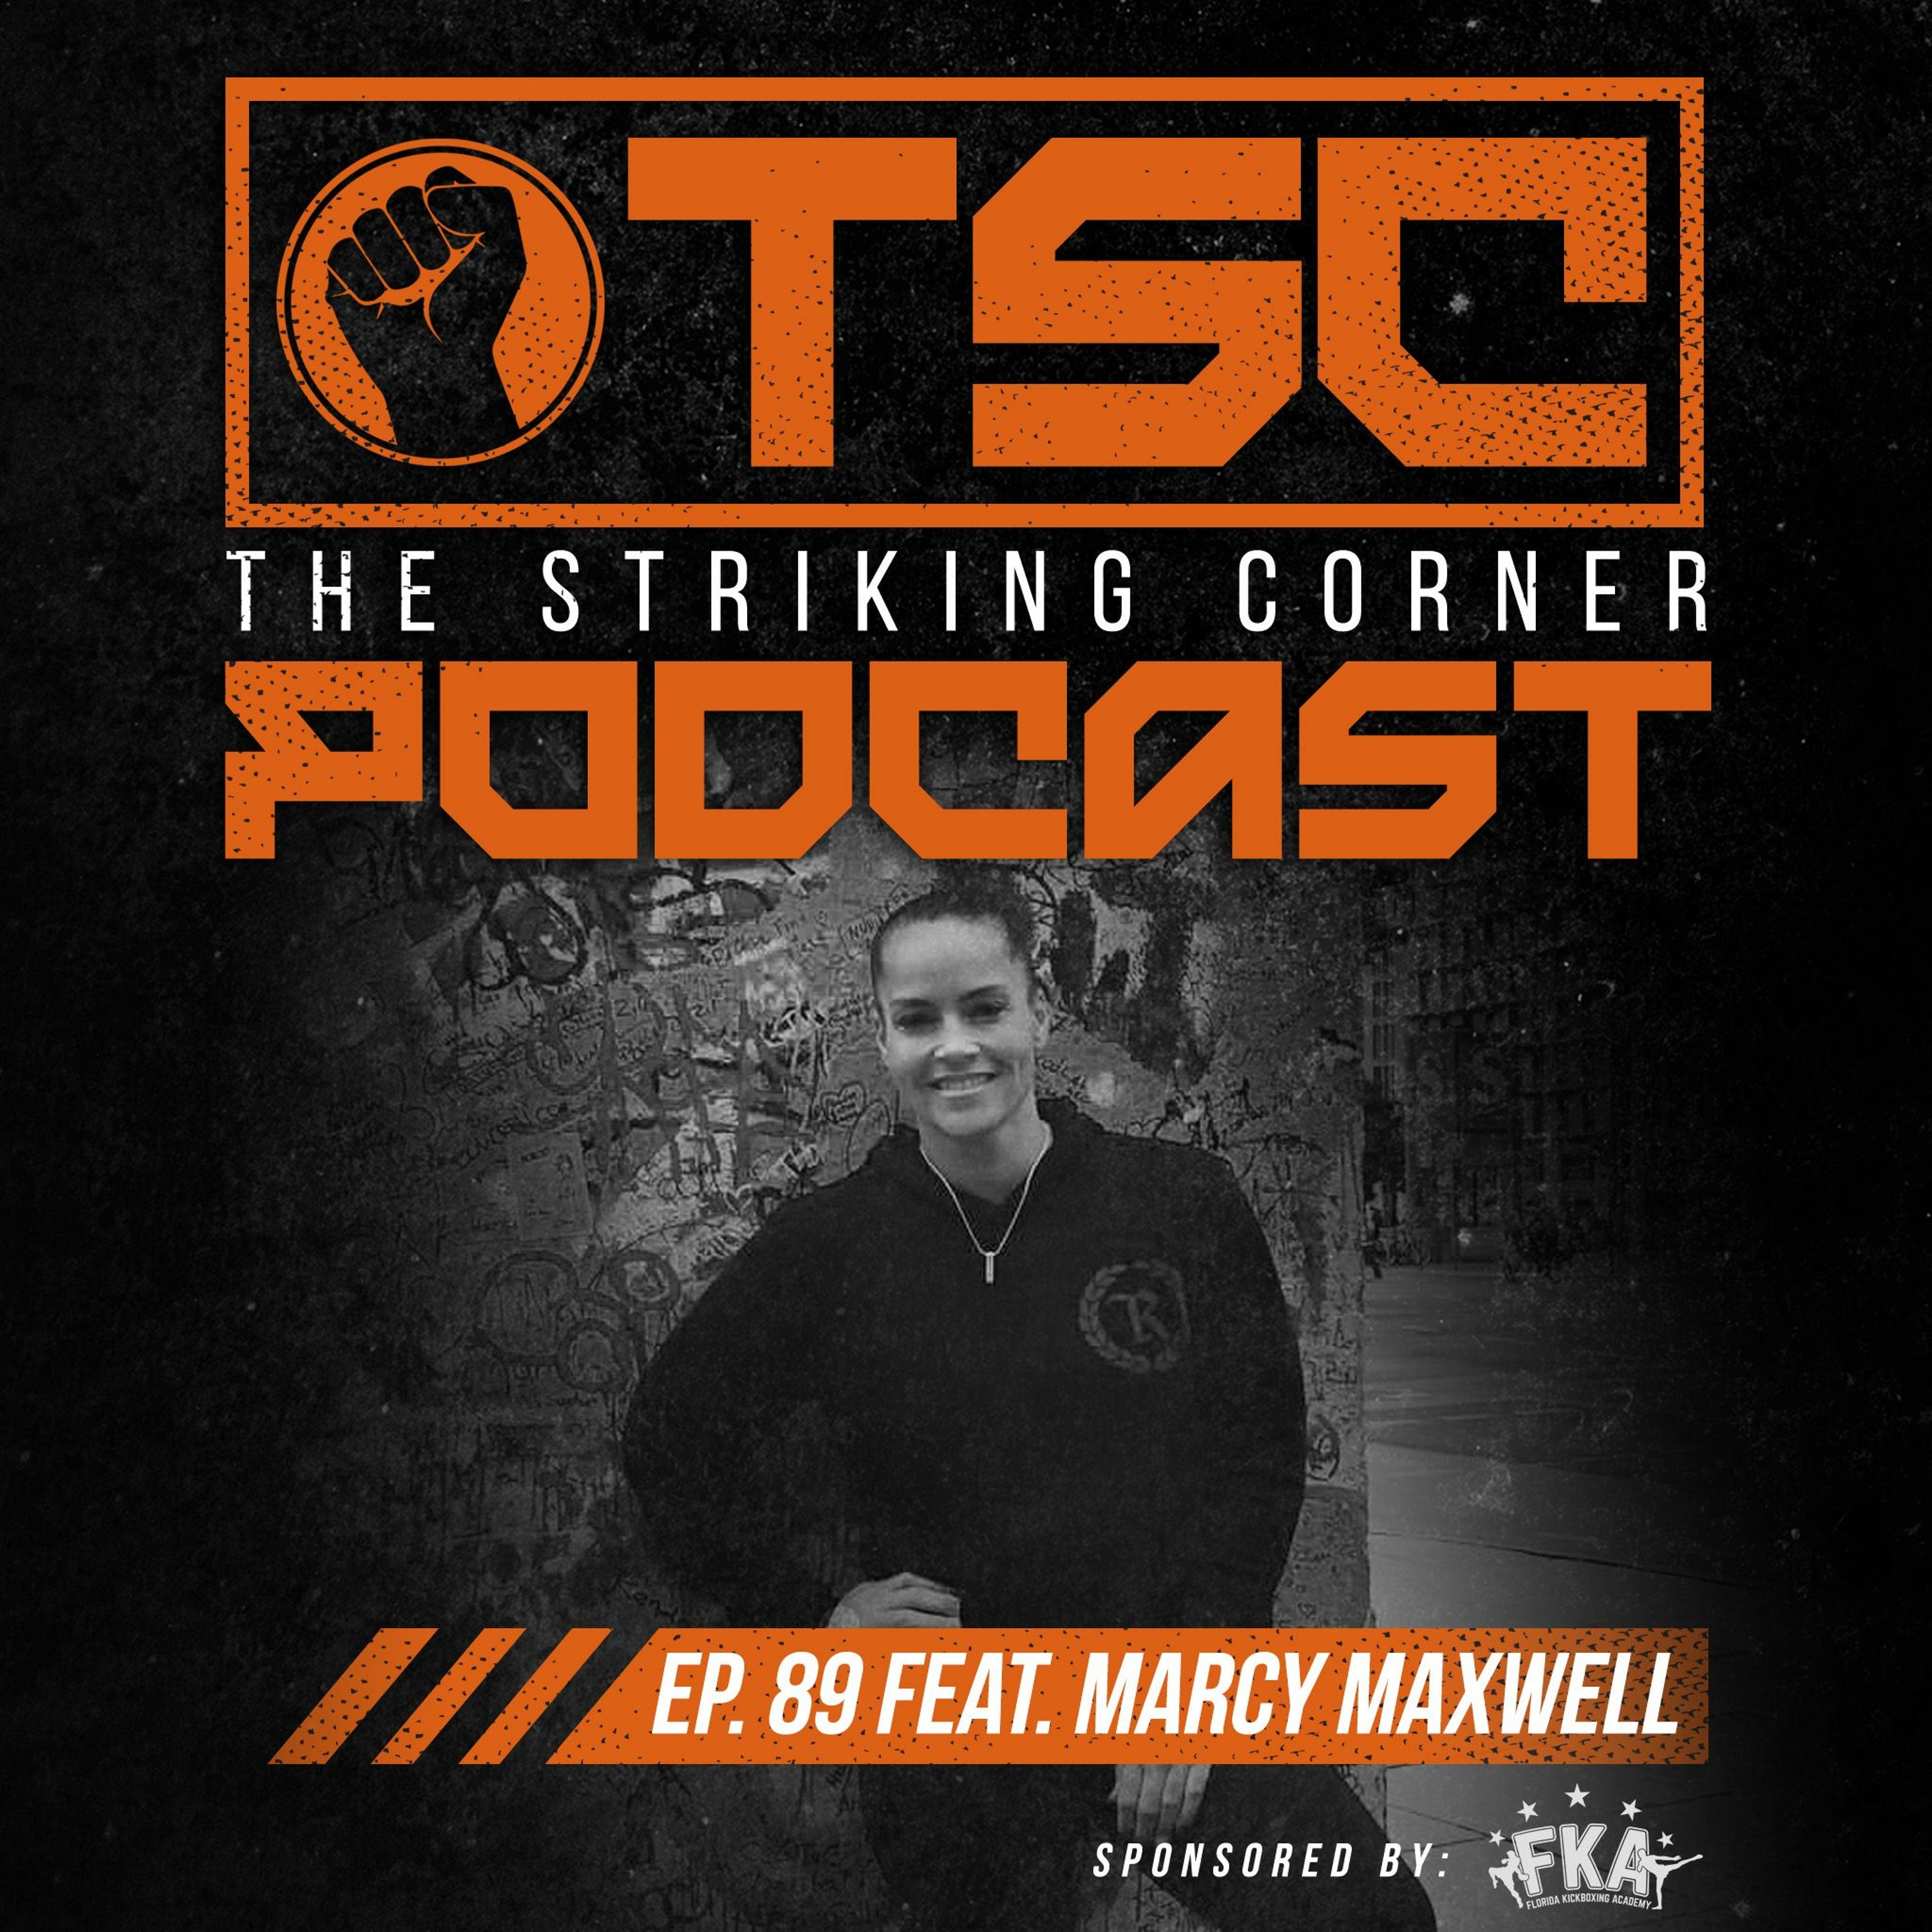 Ep. 89 feat. Marcy Maxwell